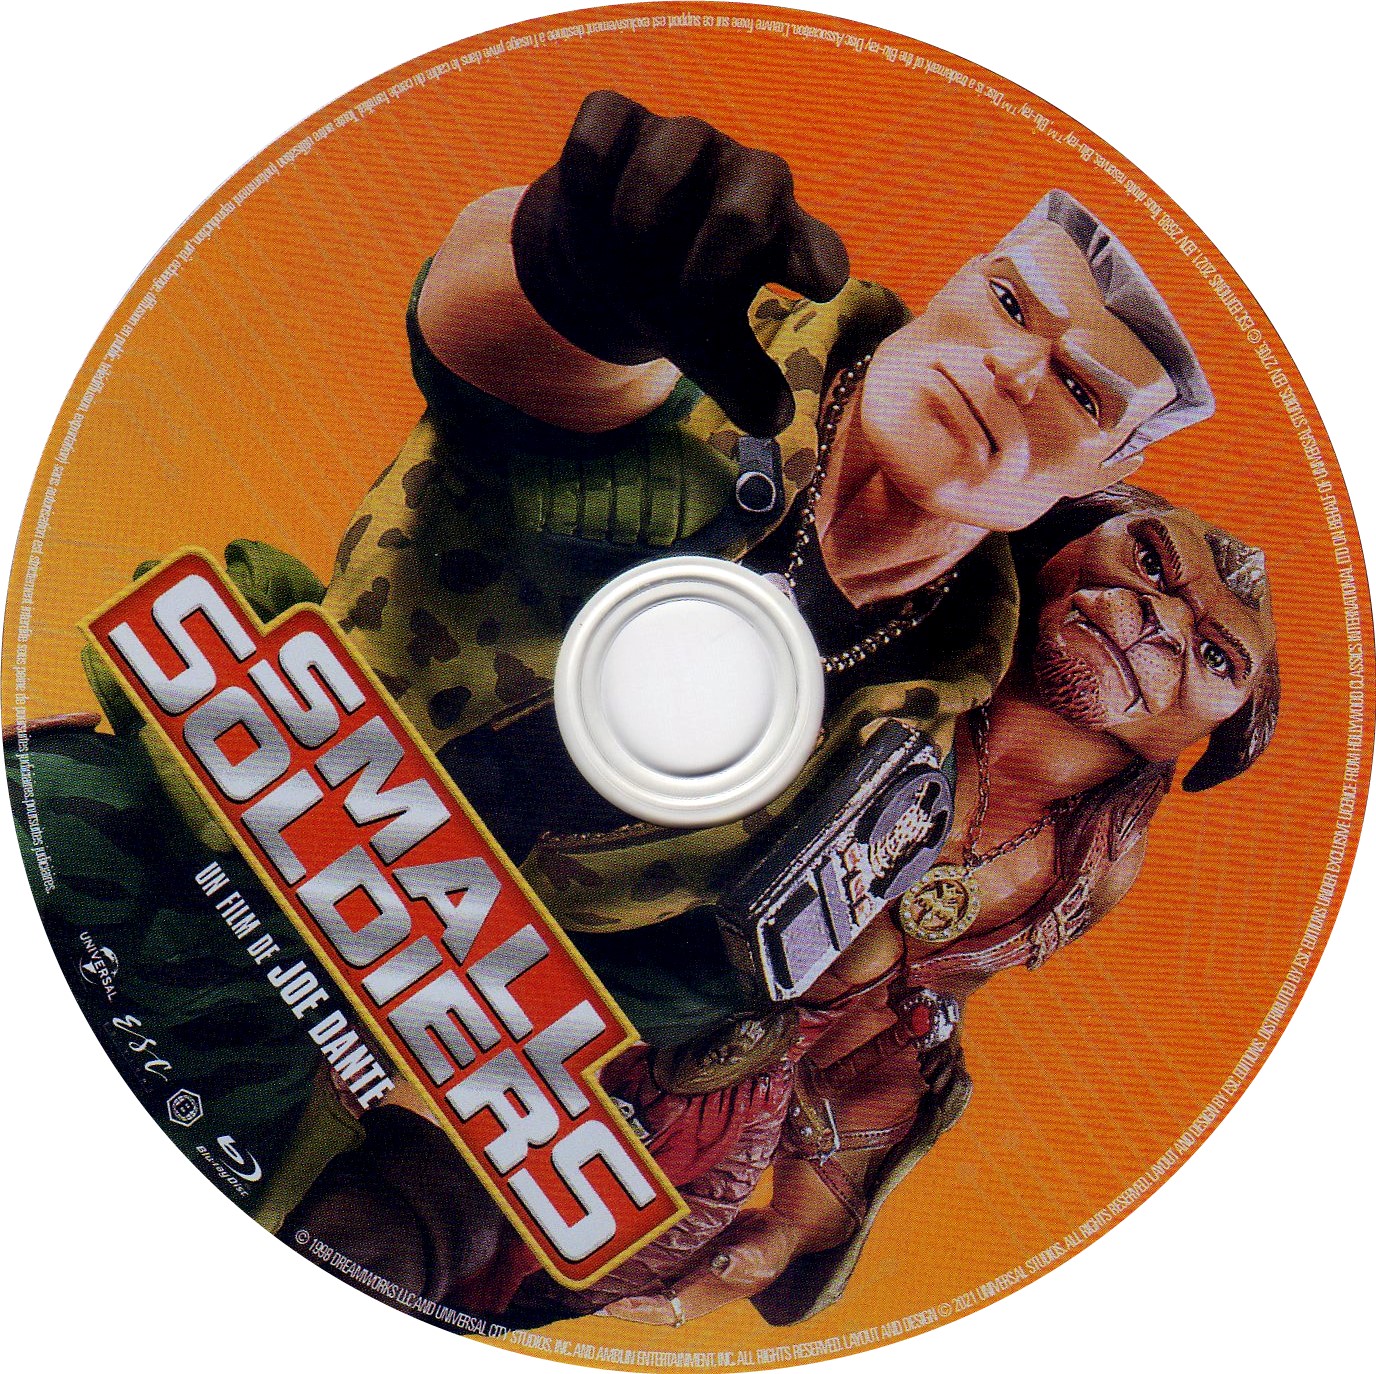 Small soldiers (BLU-RAY)